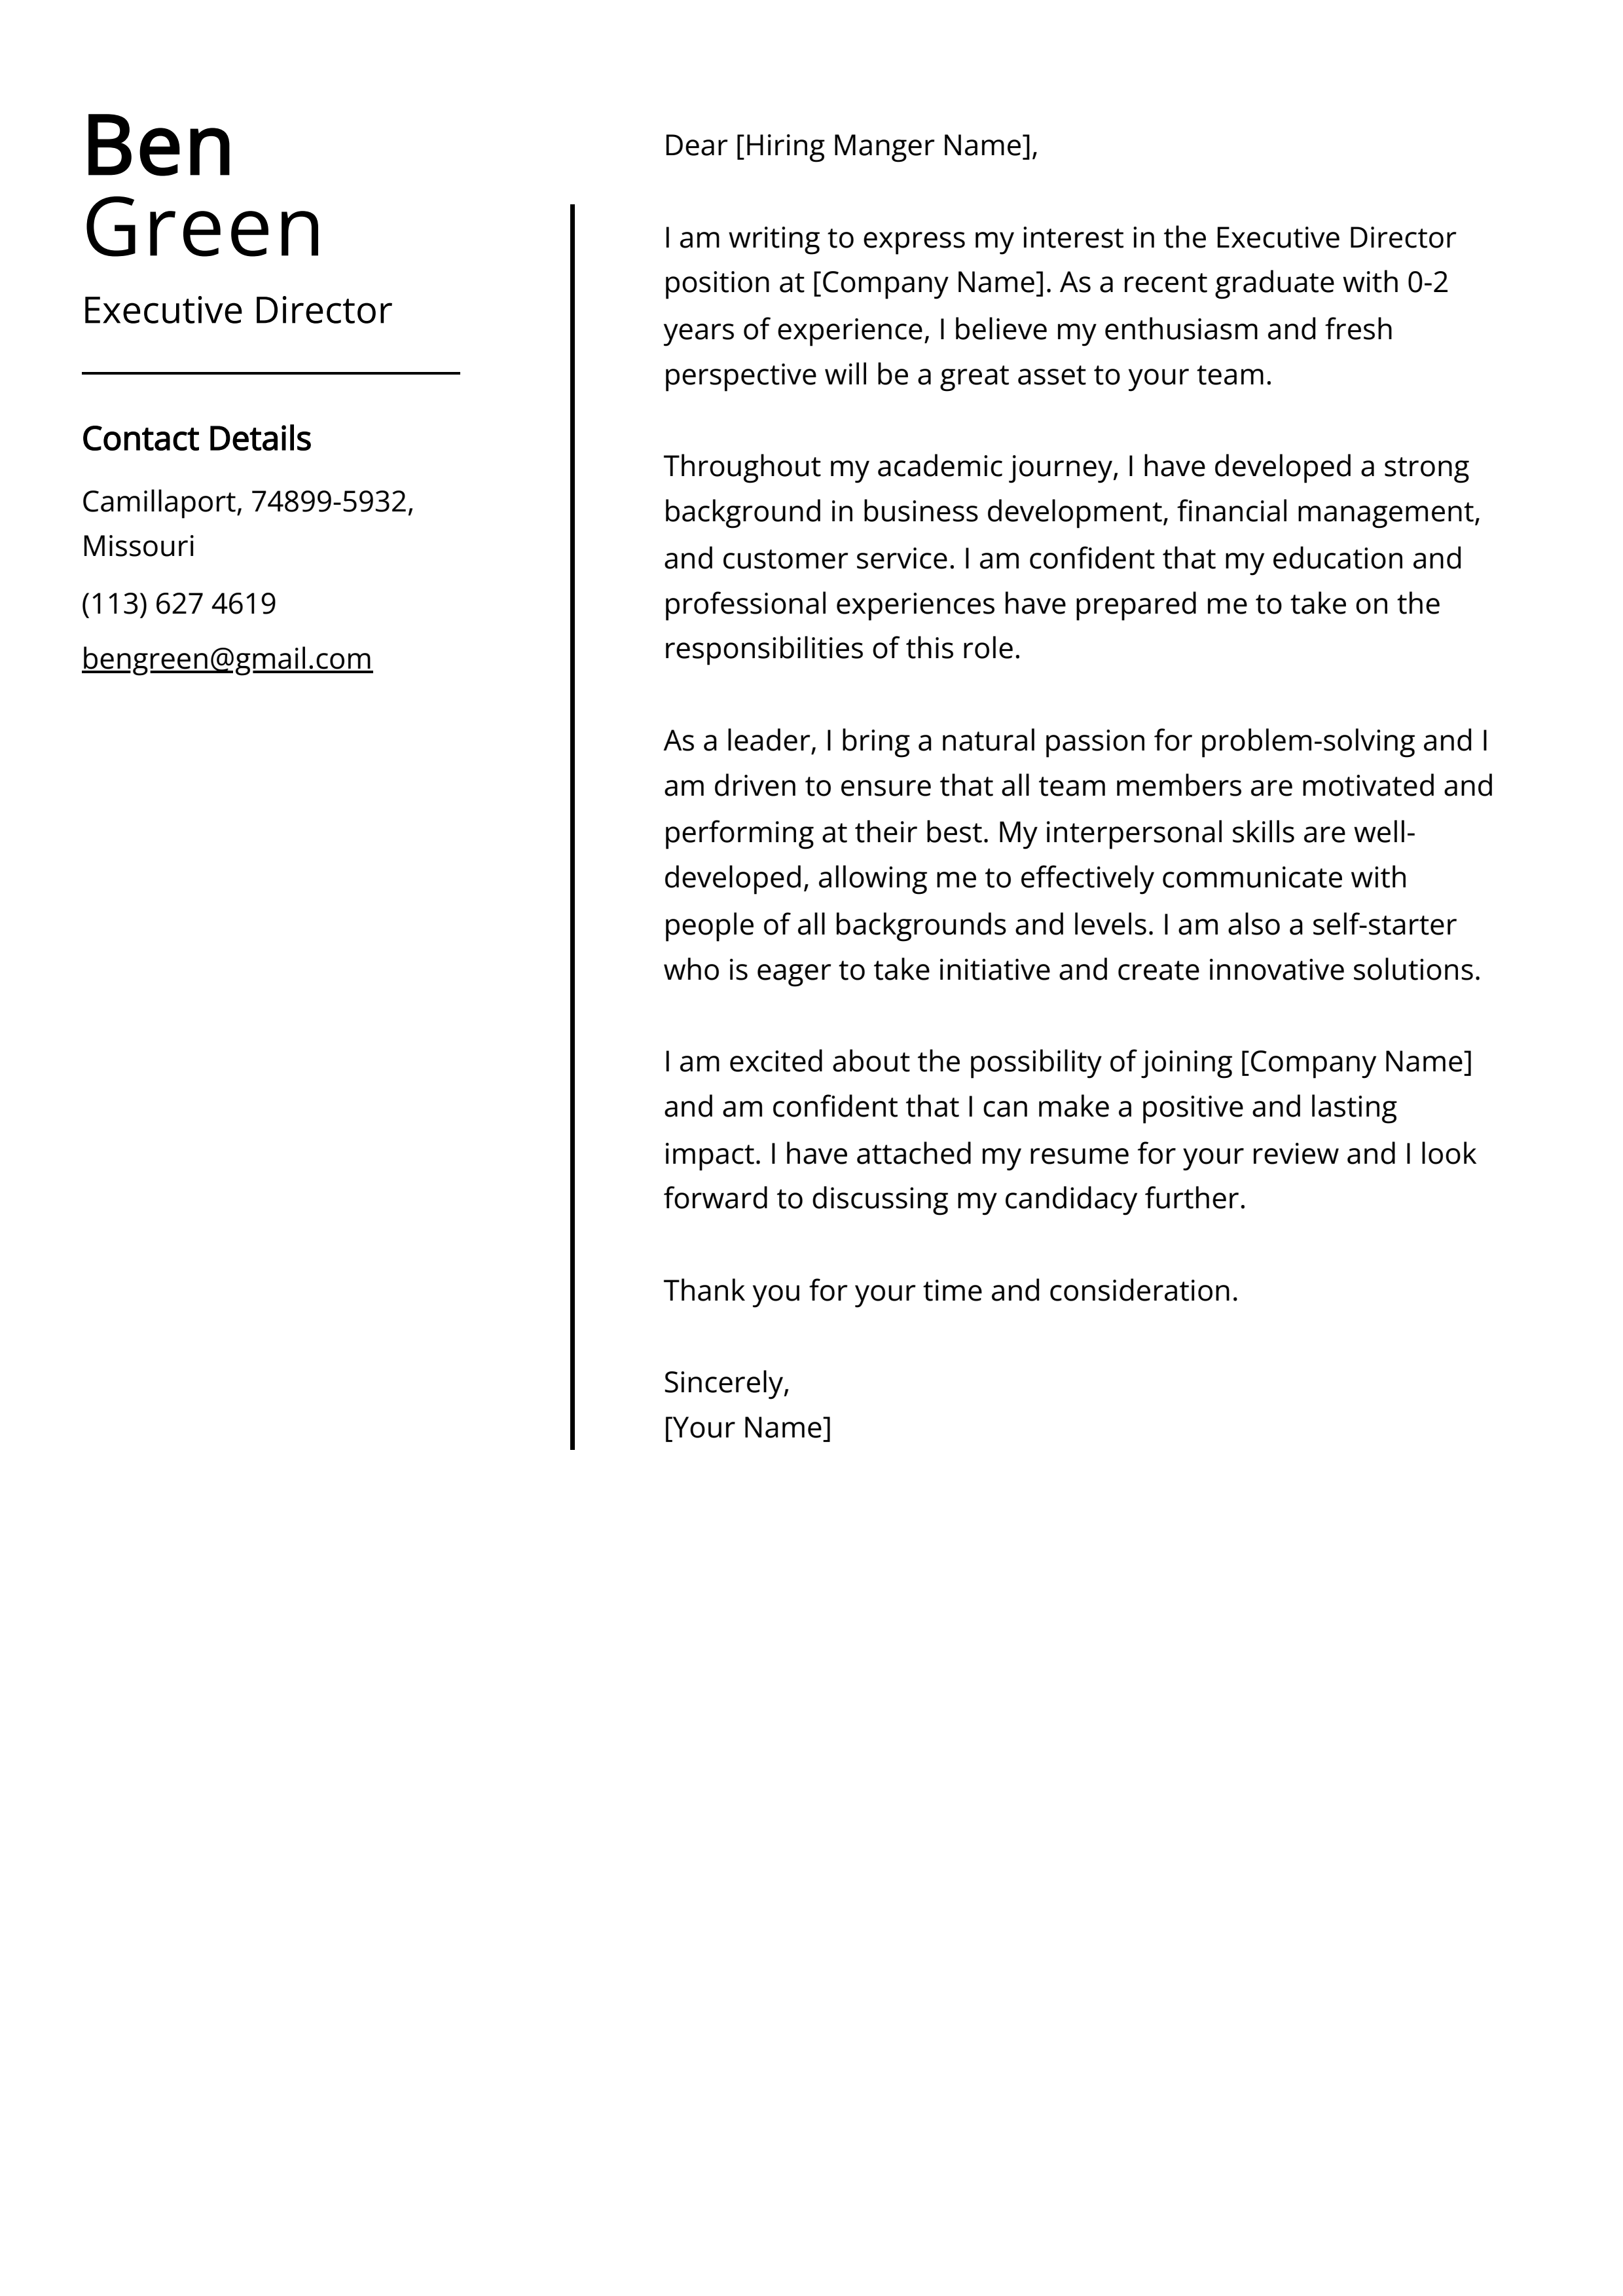 Executive Director Cover Letter Example